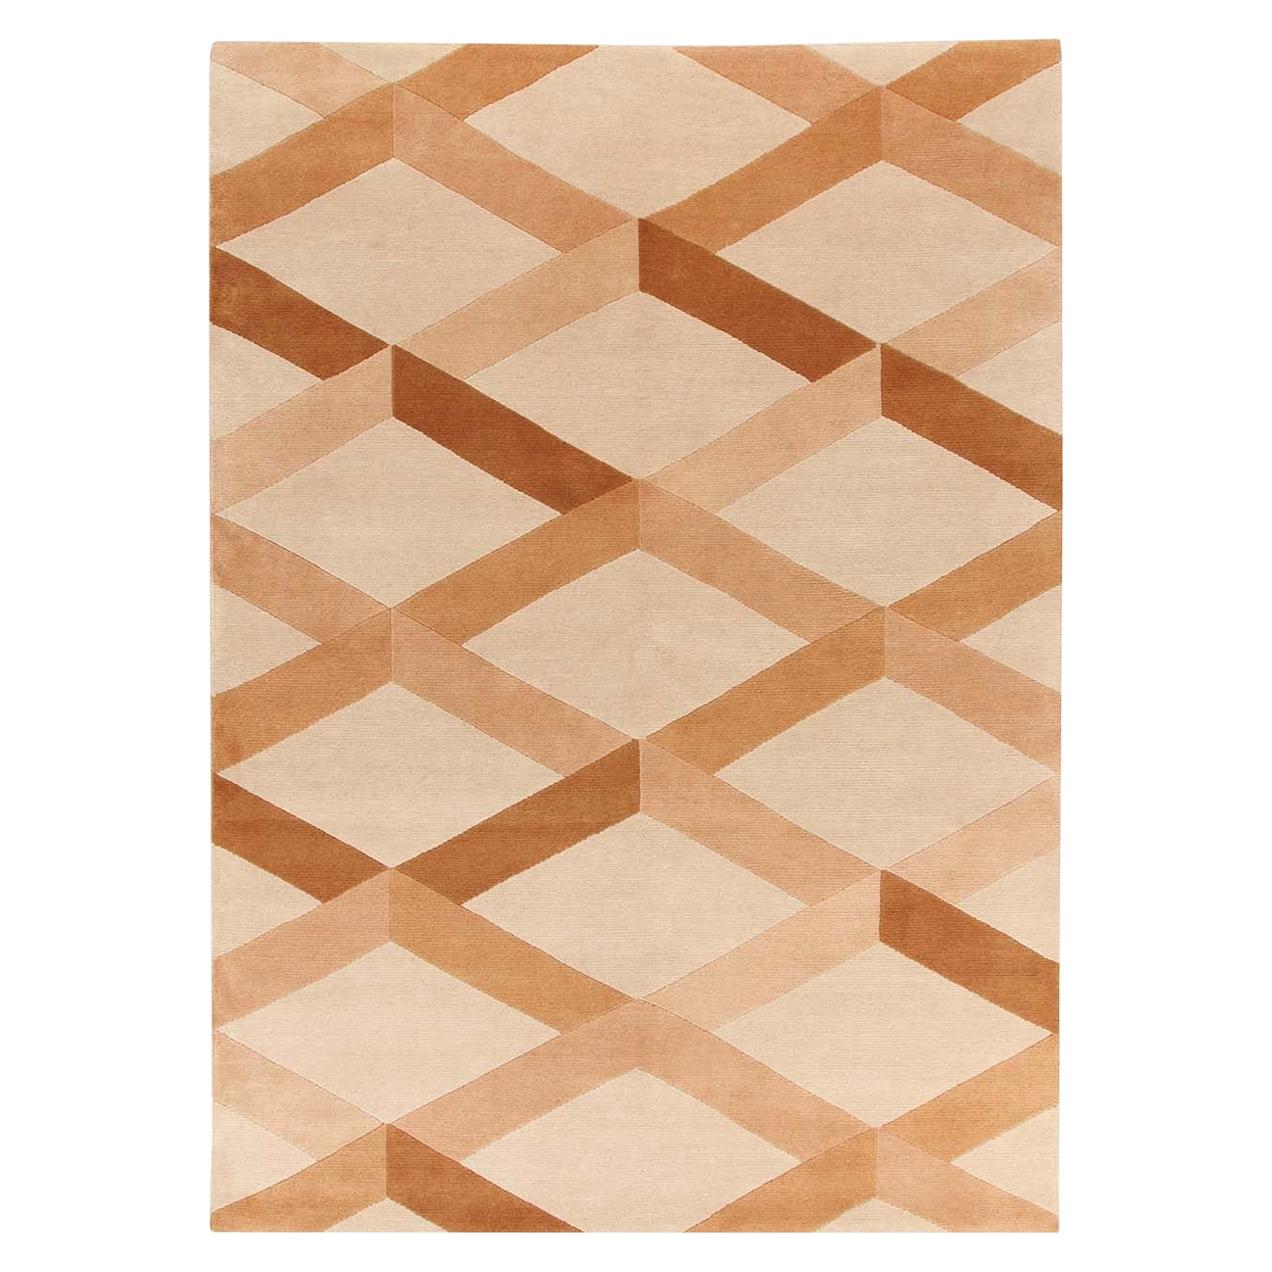 Incroci Beige Carpet by Gio Ponti For Sale